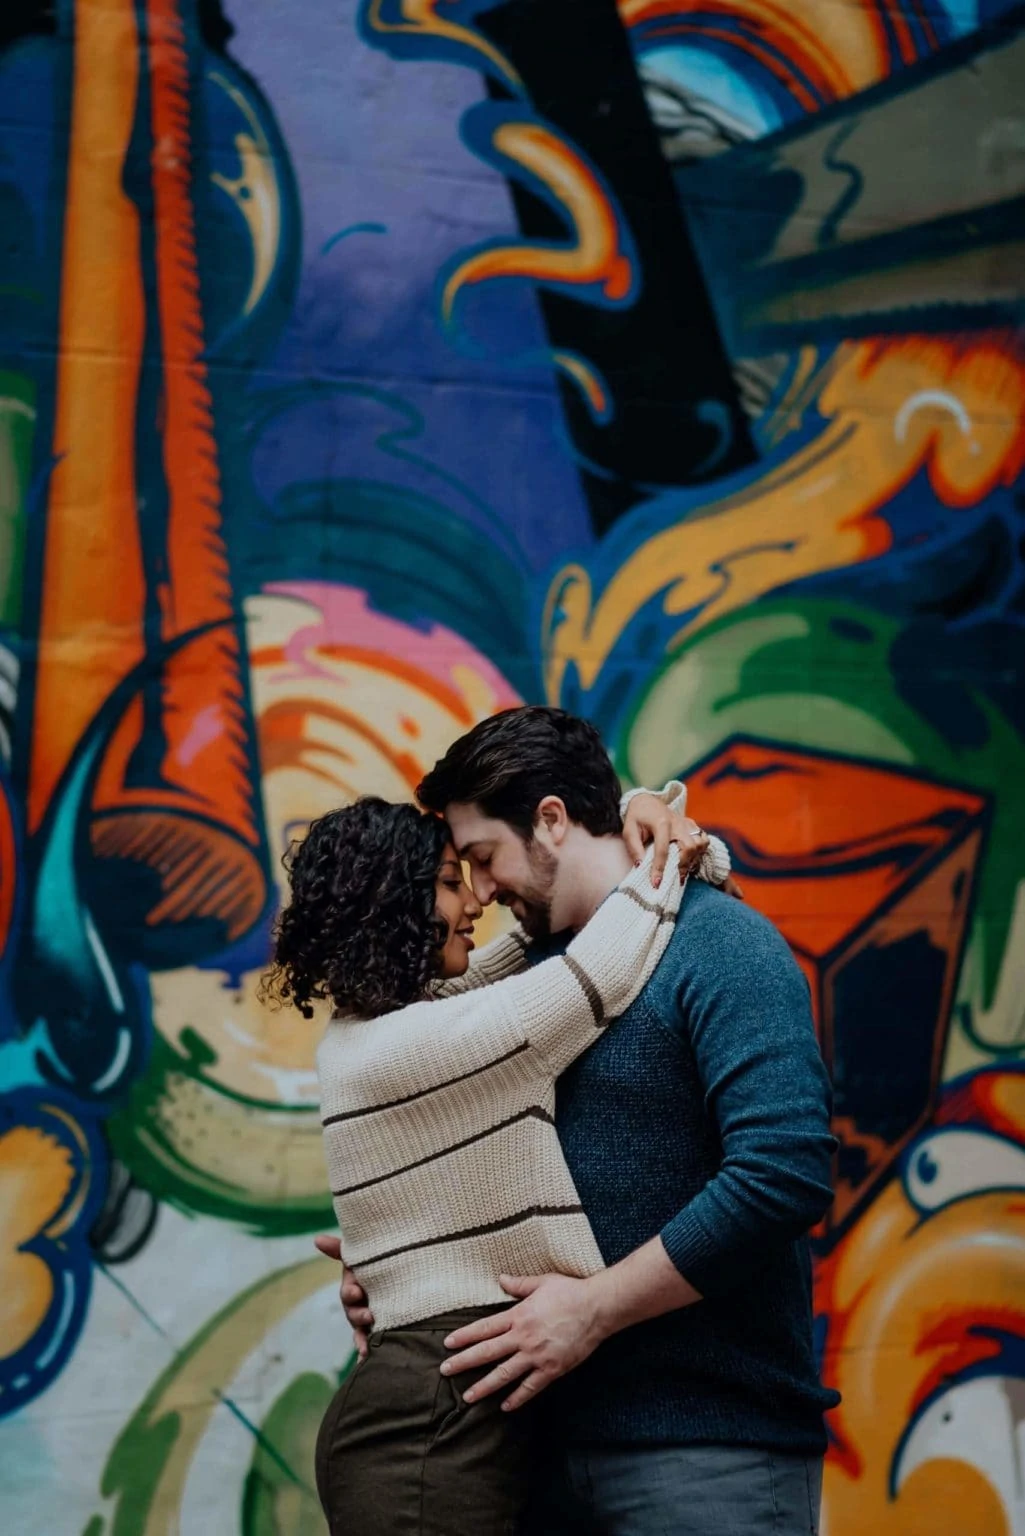 A couple embraces in front of a colorful mural.